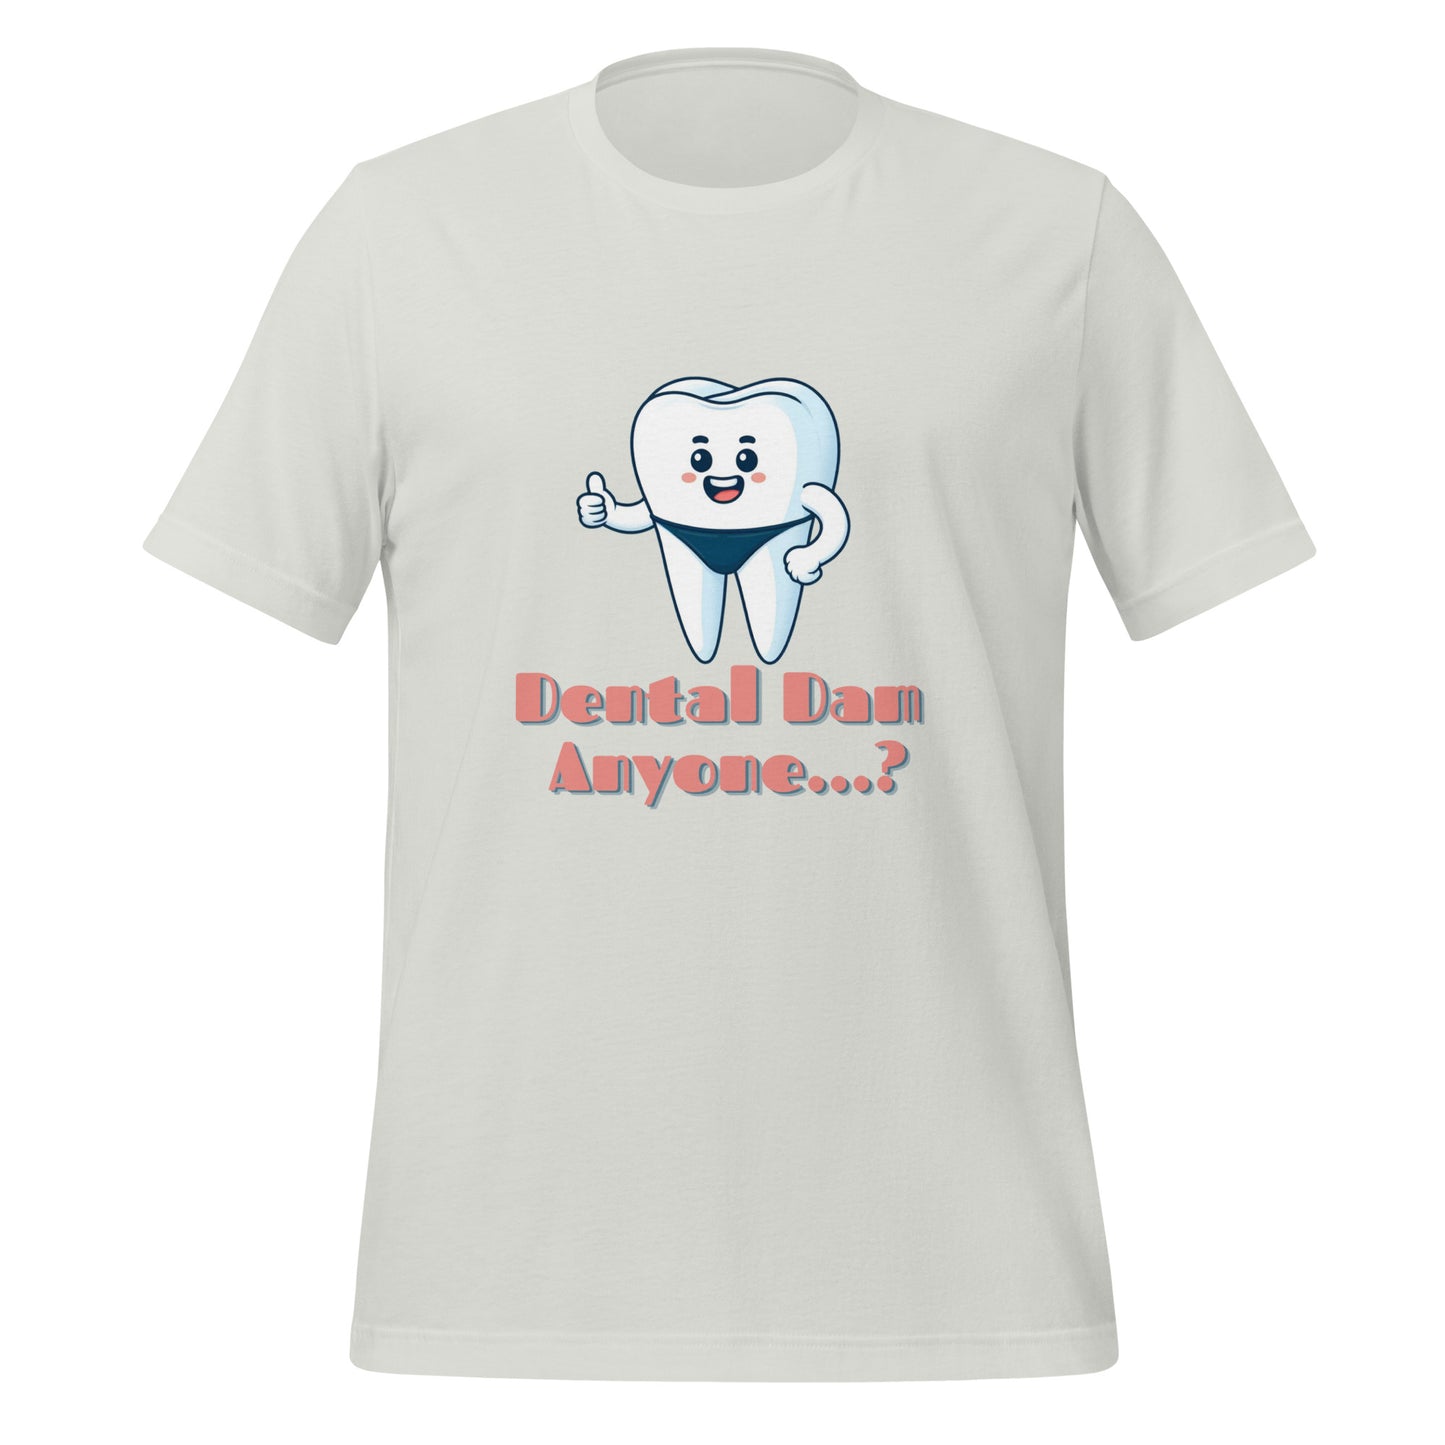 Funny dental shirt featuring a playful tooth character in a speedo with the text ‘Dental Dam Anyone?’, perfect for dentists, dental hygienists, and dental students who enjoy dental humor. This dental shirt is a unique addition to any dental professional’s wardrobe, making it an ideal dental office shirt. Don’t miss out on our dental assistant shirts and dental hygiene shirts. Silver color.